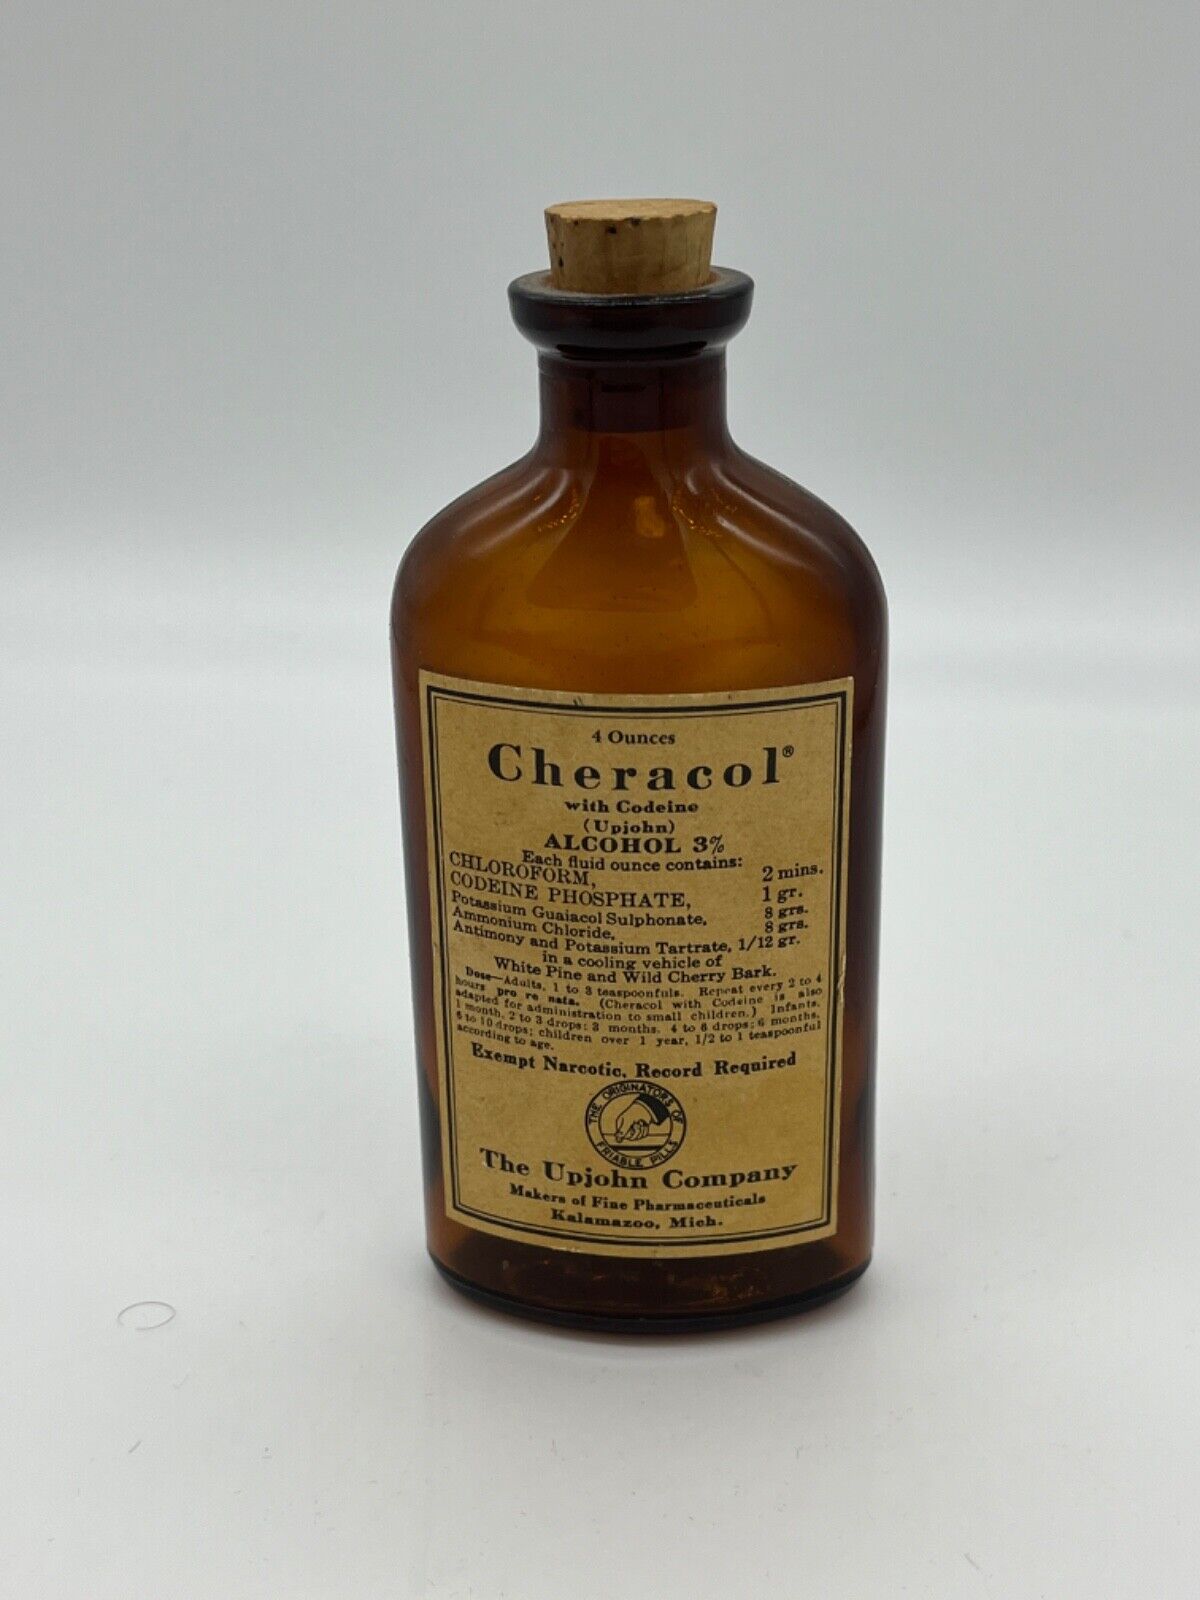 VTG Bottle Cheracol brown with label 4 ounces with cork The Upjohn Company